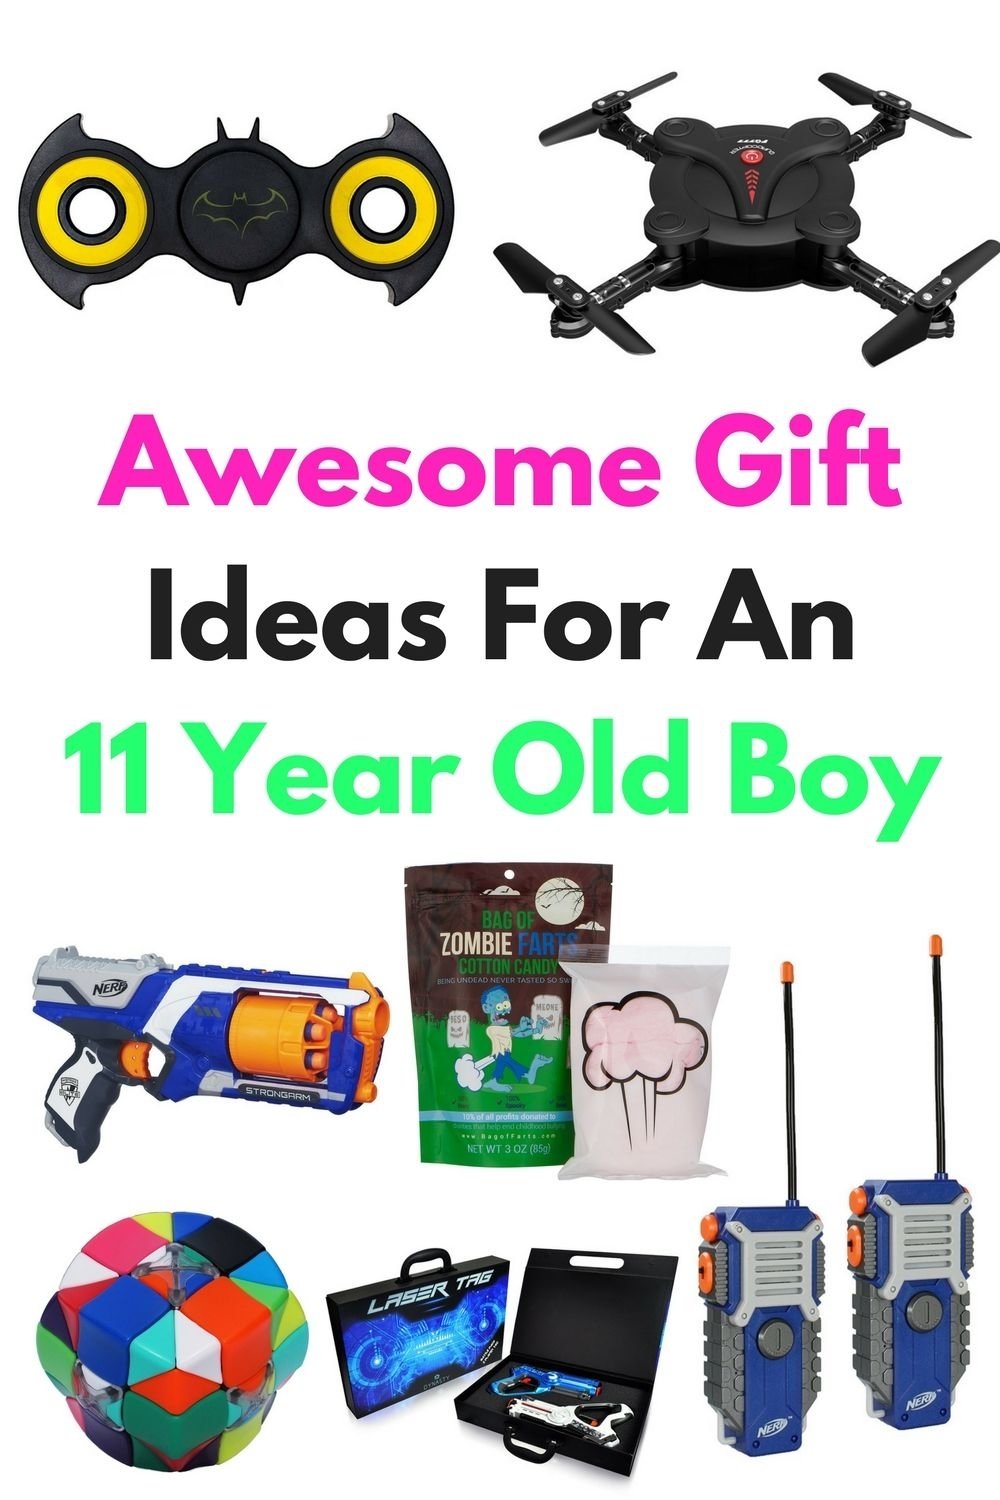 10 Famous Gift Ideas For 12 Year Old Boy awesome gift ideas for an 11 year old boy awesome gifts easter 2 2022